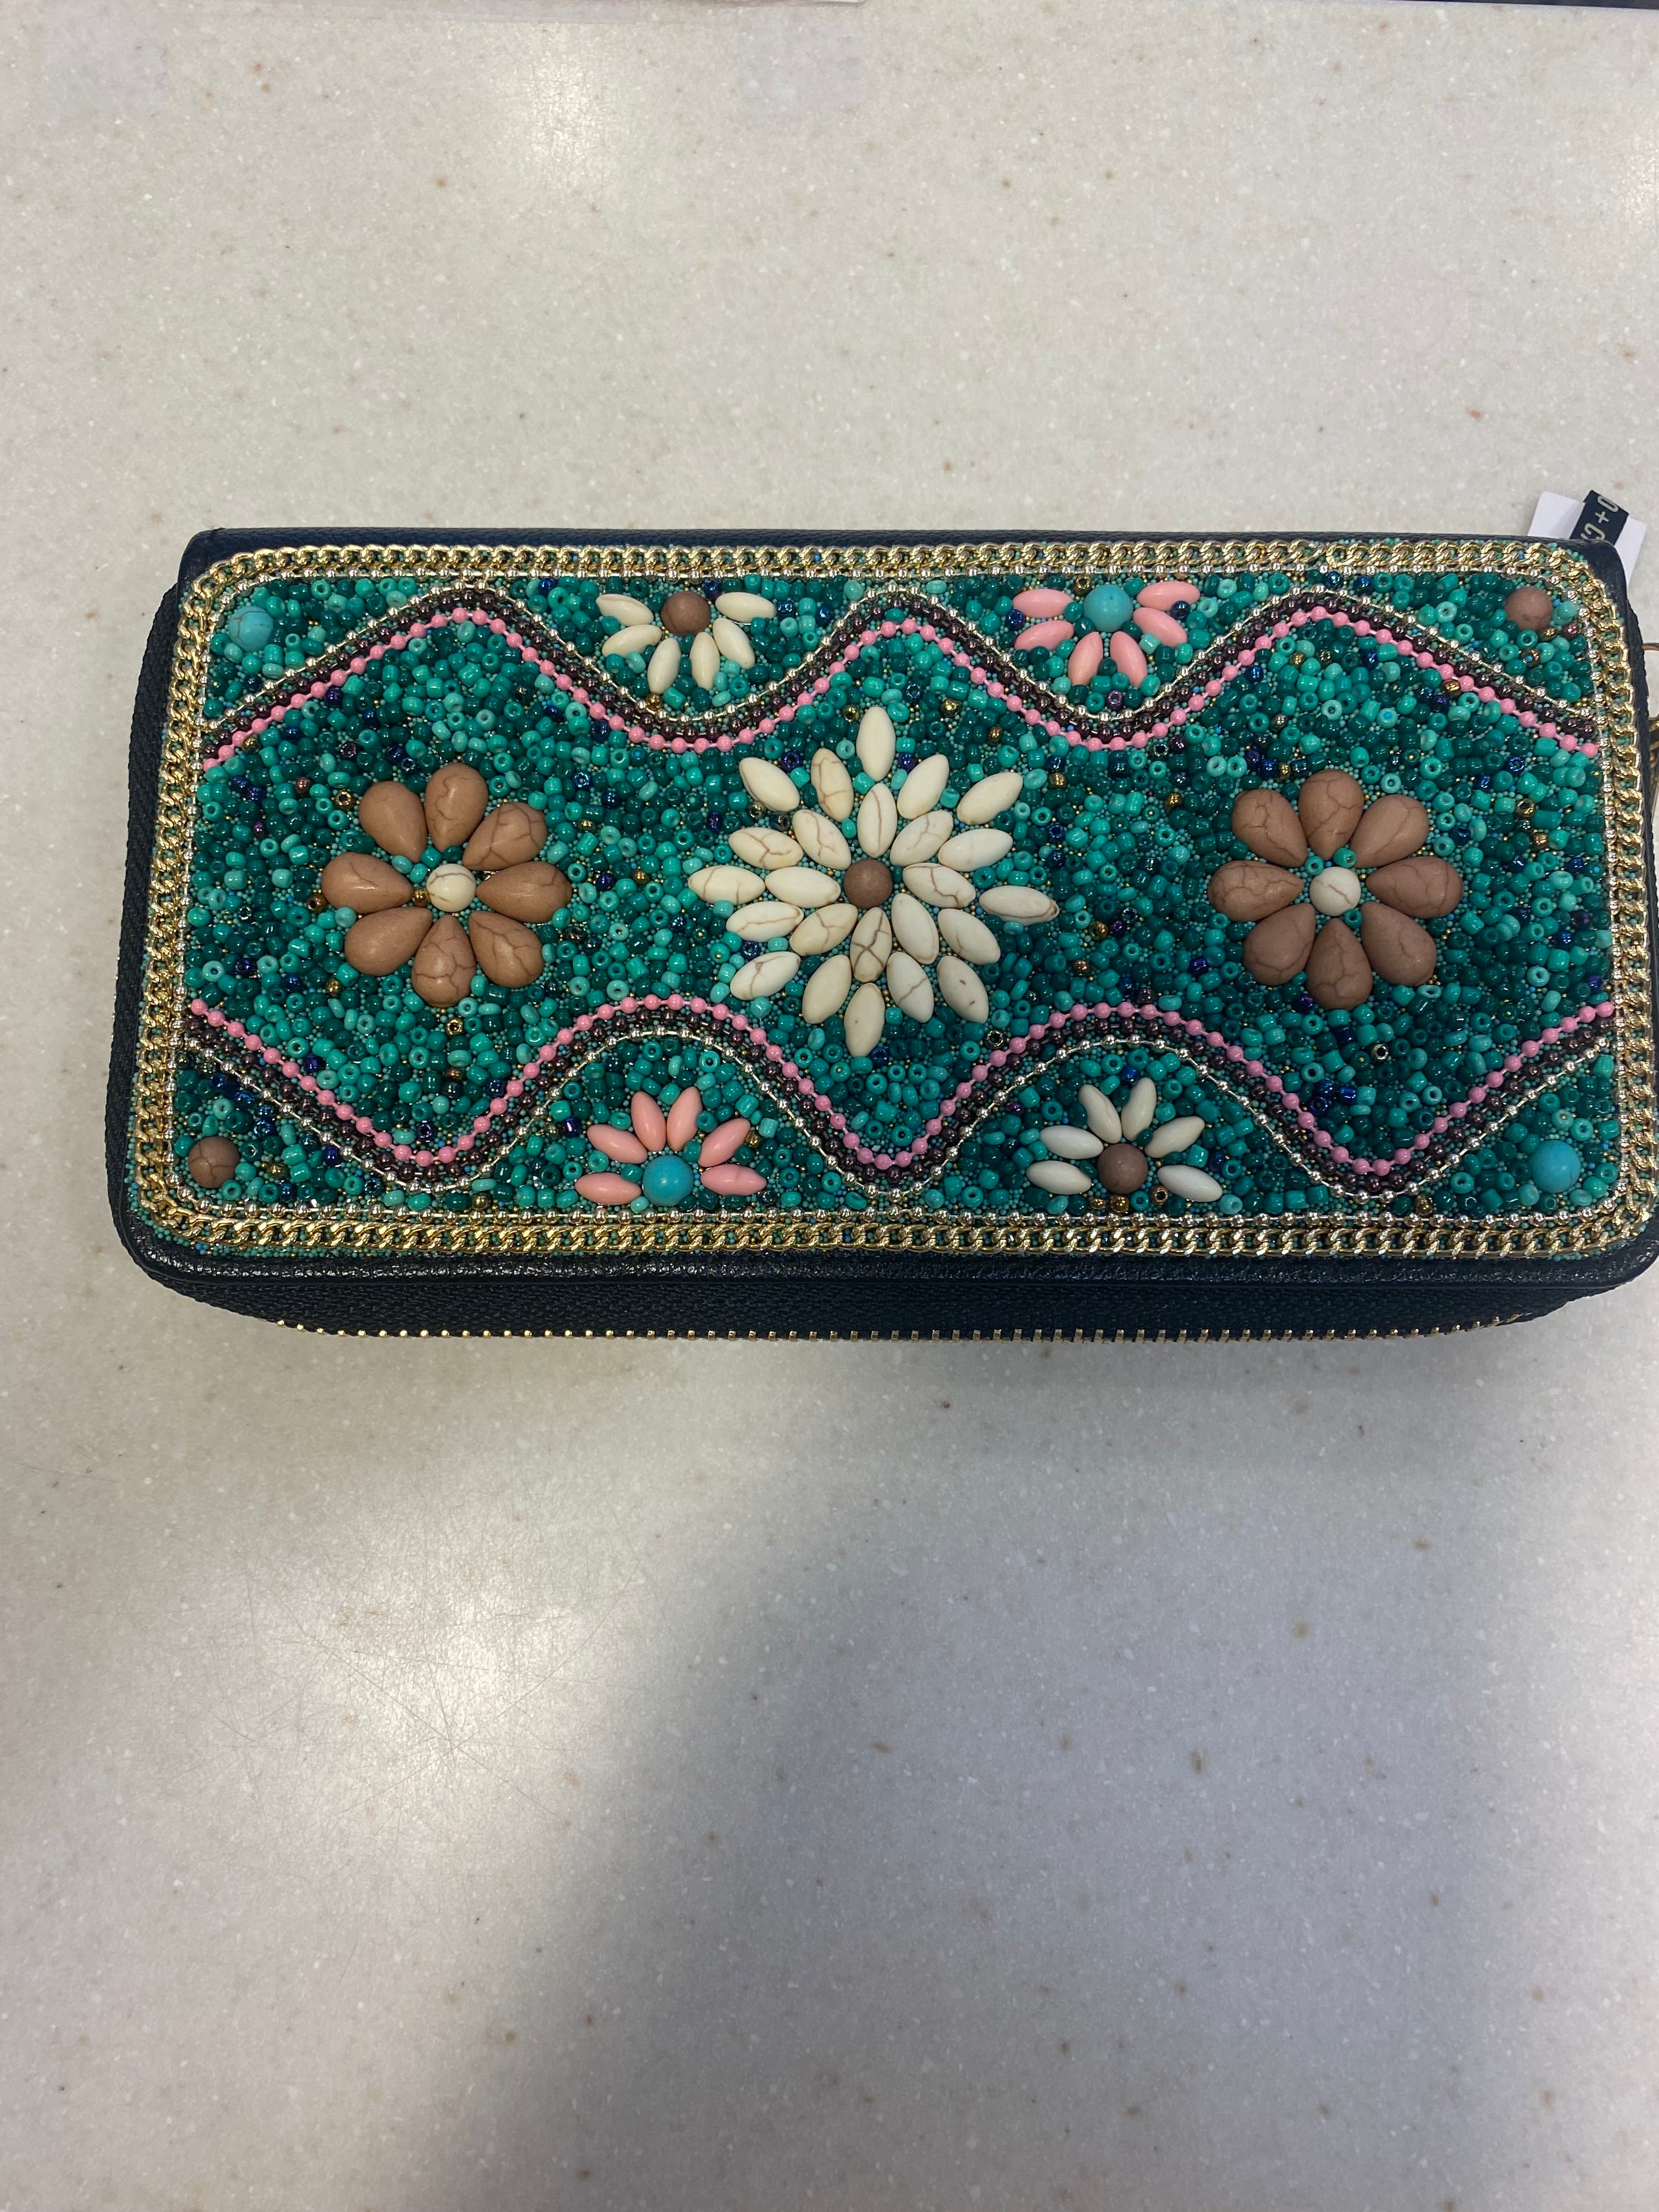 COCO & CARMEN Artisan Beaded Wallet - Turquoise/Dusty Pink 2338341C